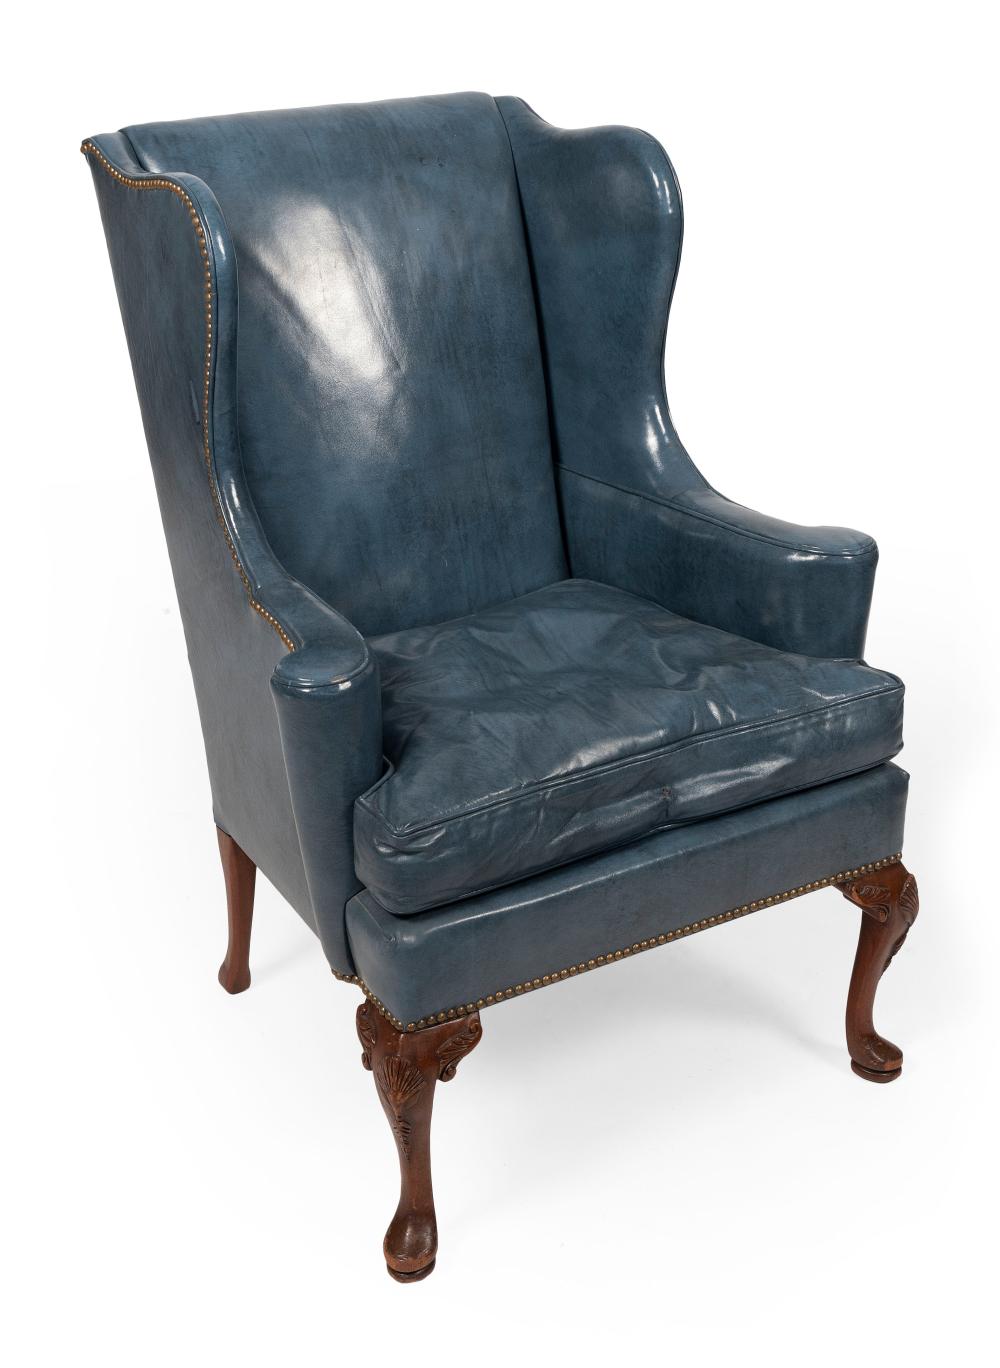 HICKORY CHAIR COMPANY LEATHER WING